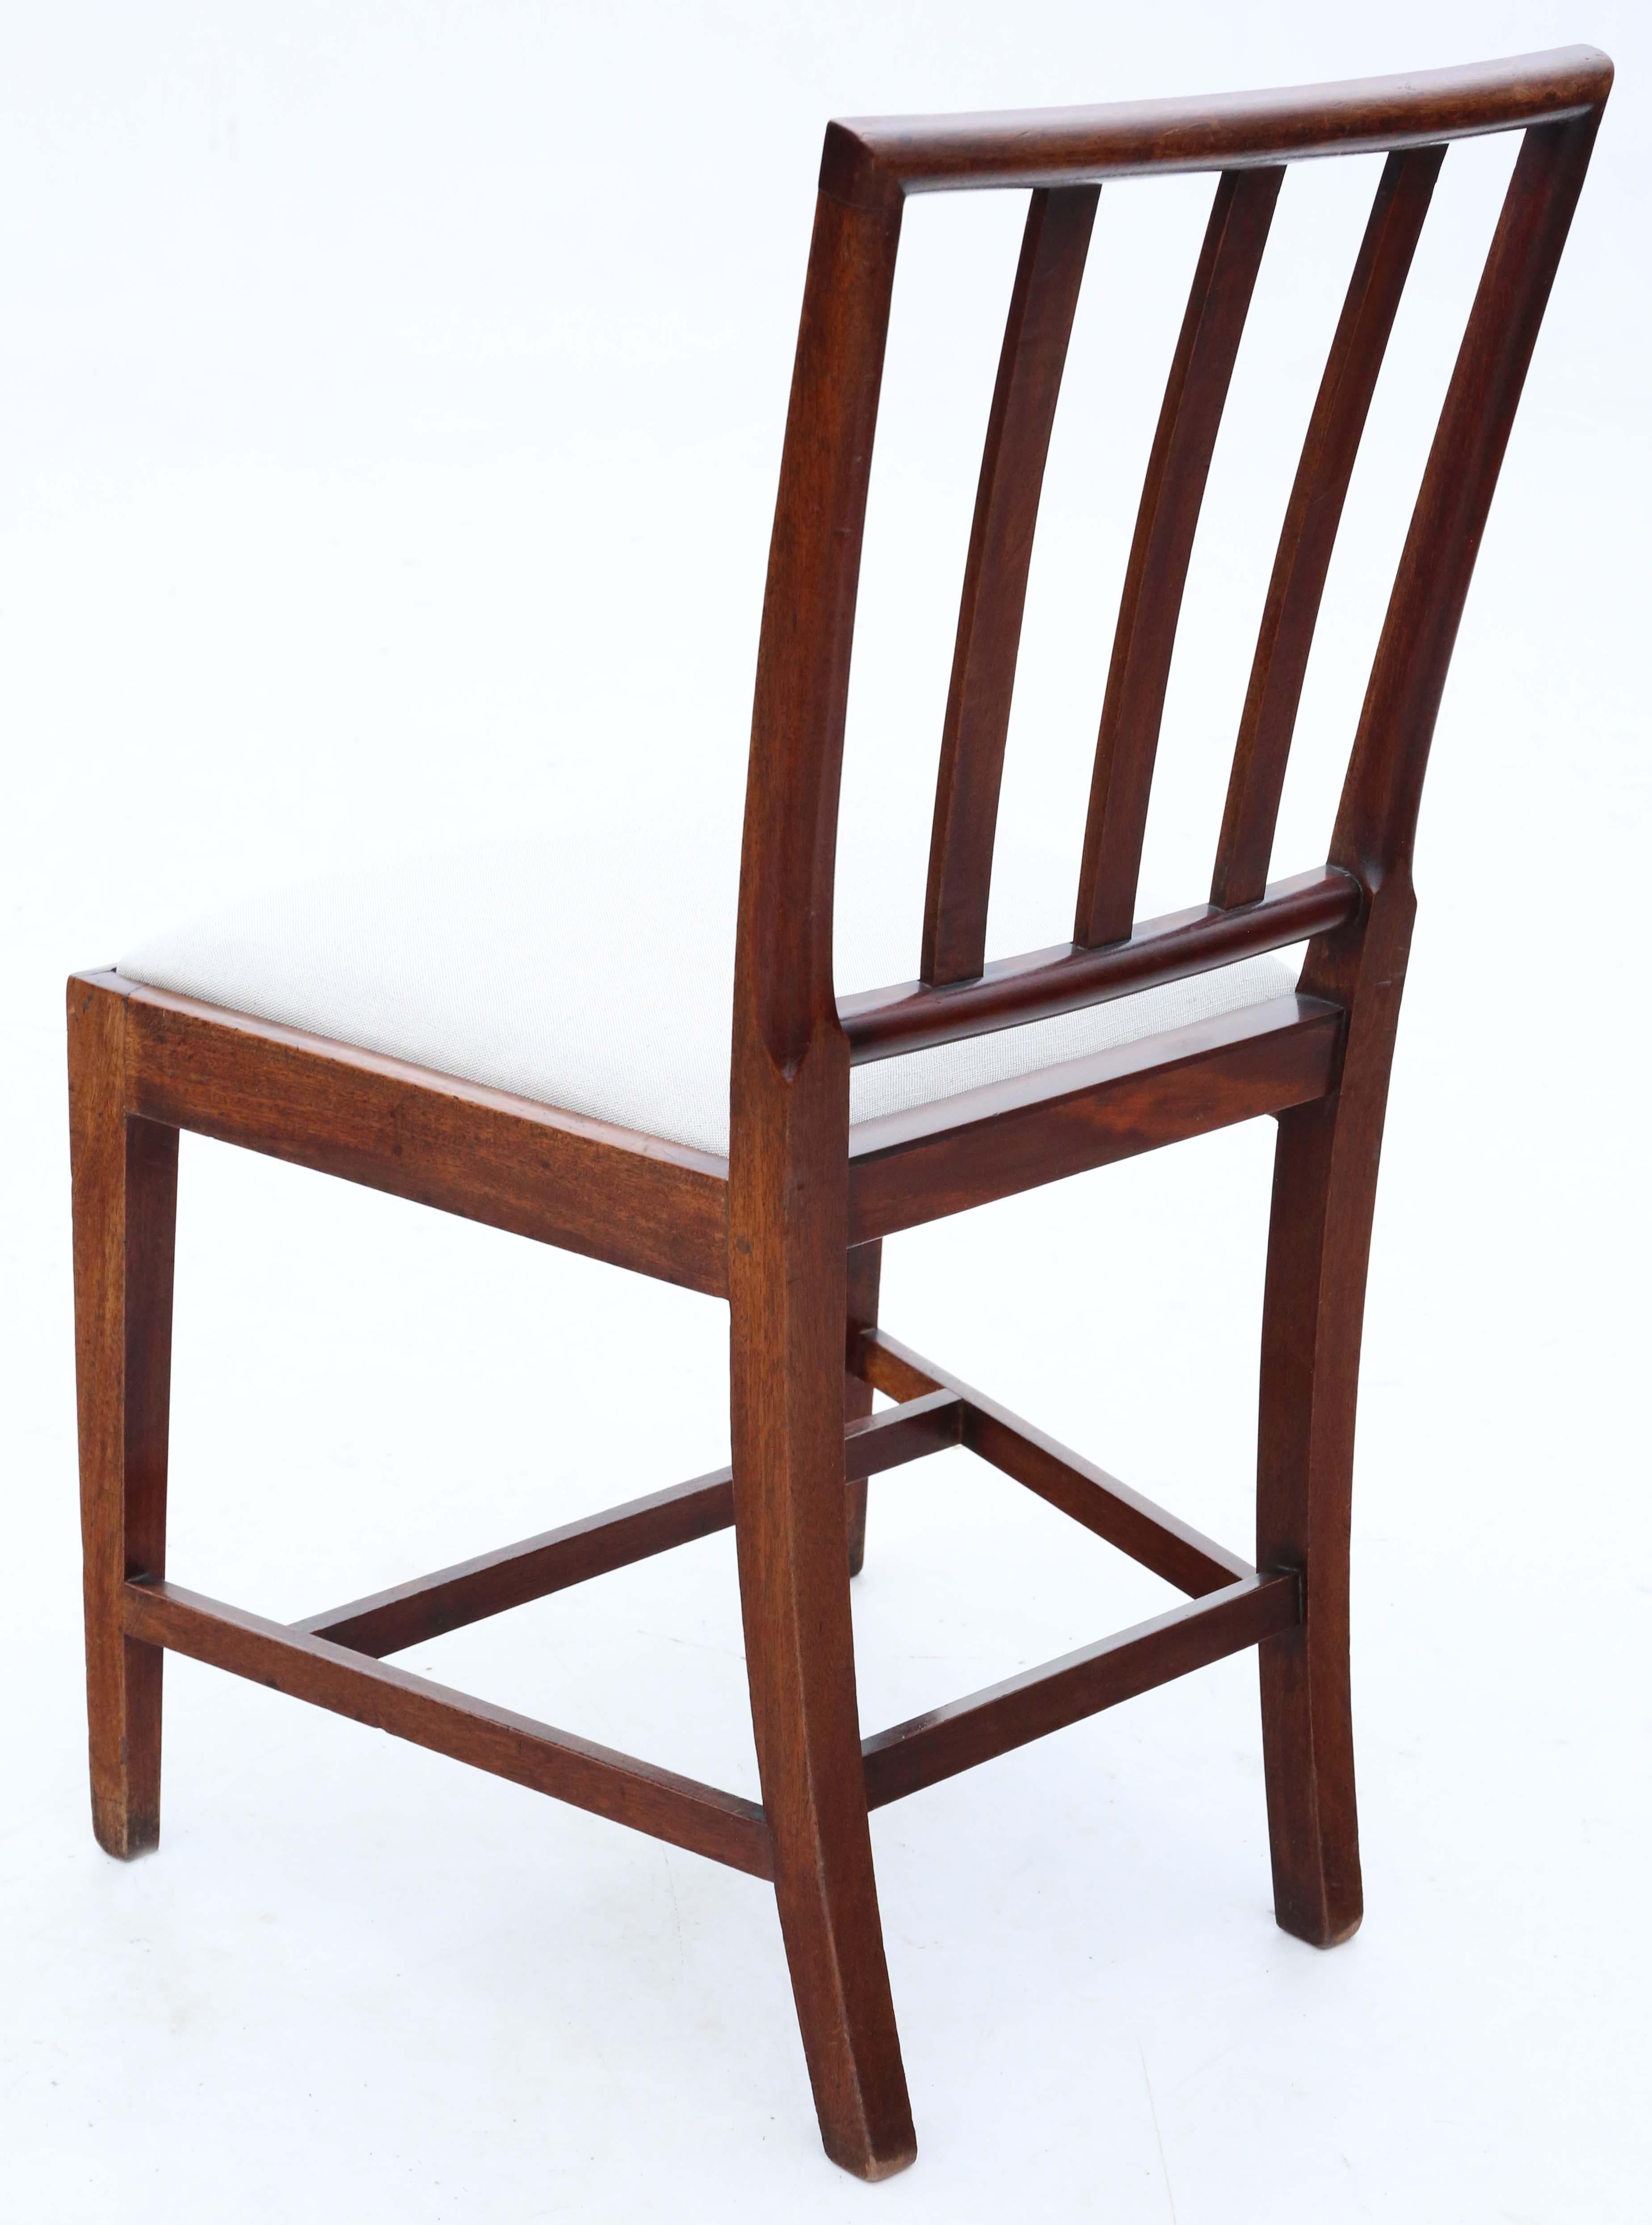 Regency Mahogany Dining Chairs: Set of 8 (6+2), Antique Quality, Early 19th C For Sale 4